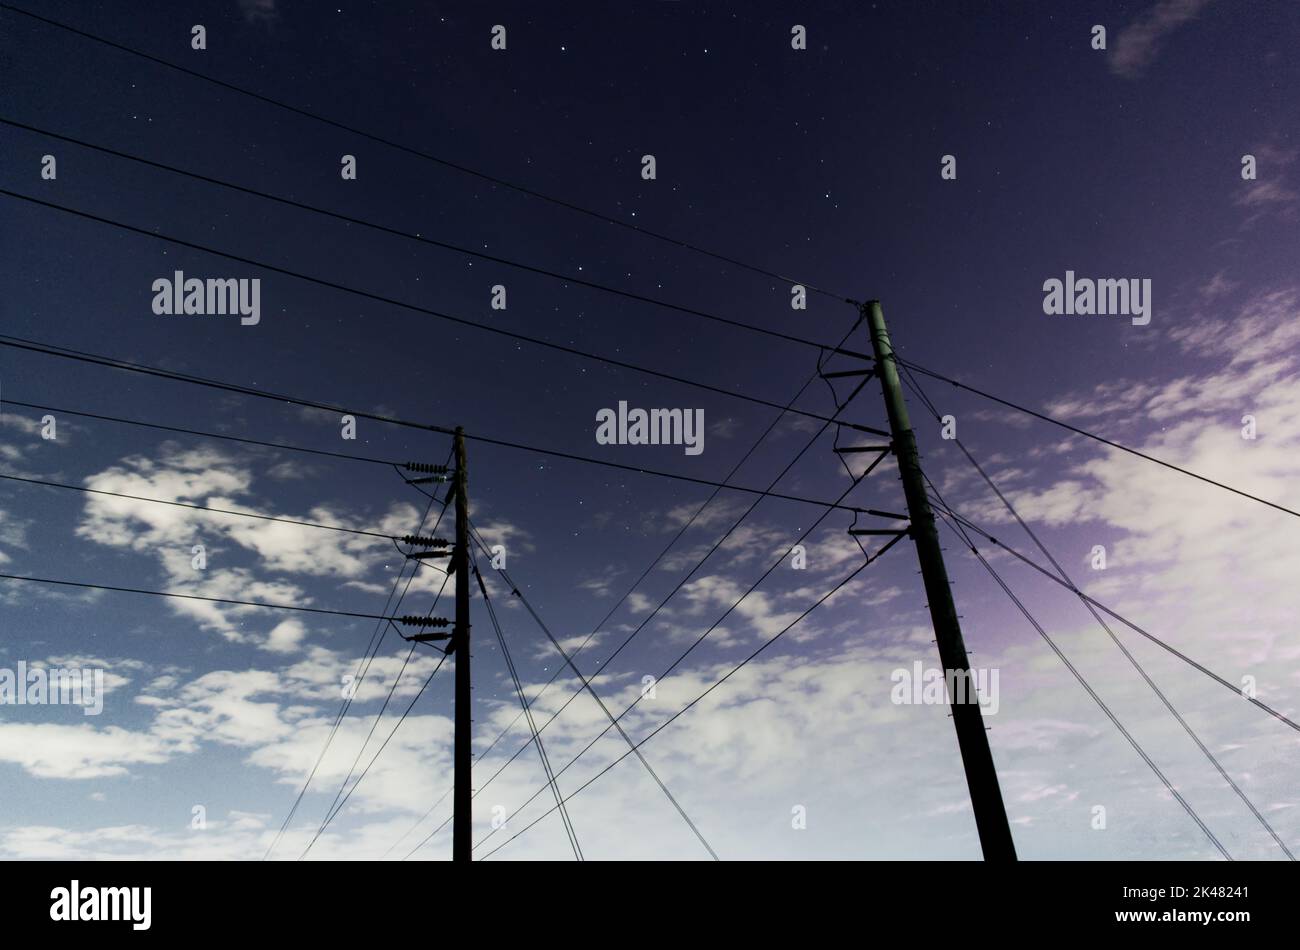 two power poles with power lines seen throughout taken at night with a few stars visible in the background behind the poles. Stock Photo